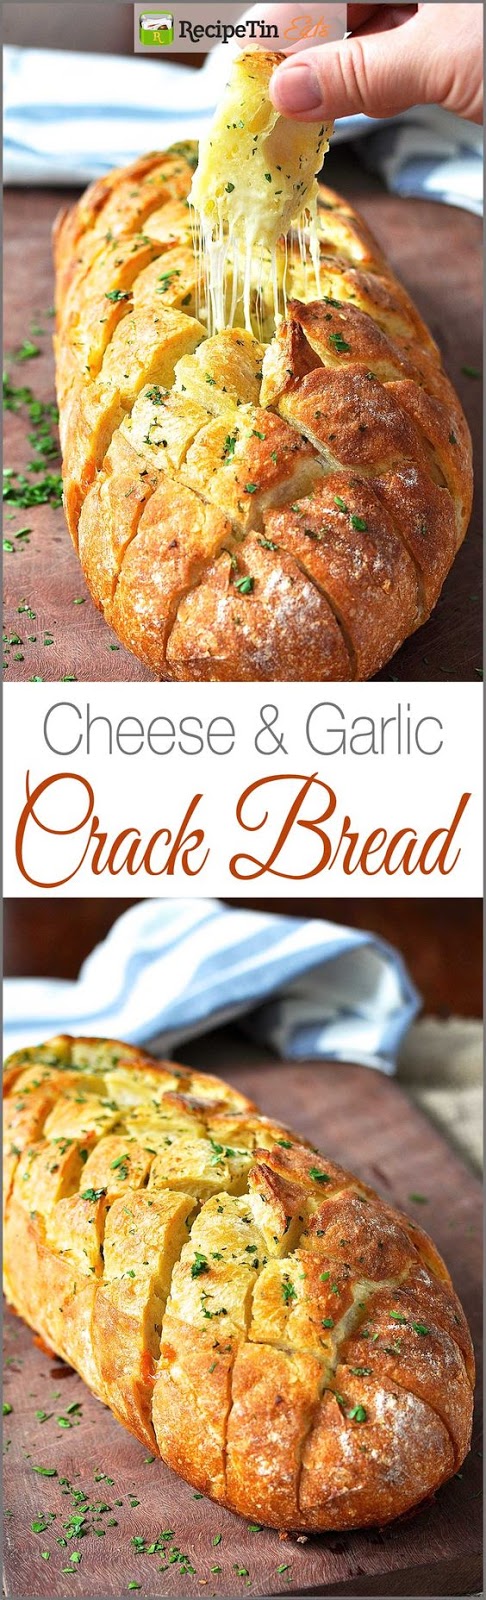 CHEESE AND GARLIC CRACK BREAD (PULL APART BREAD)